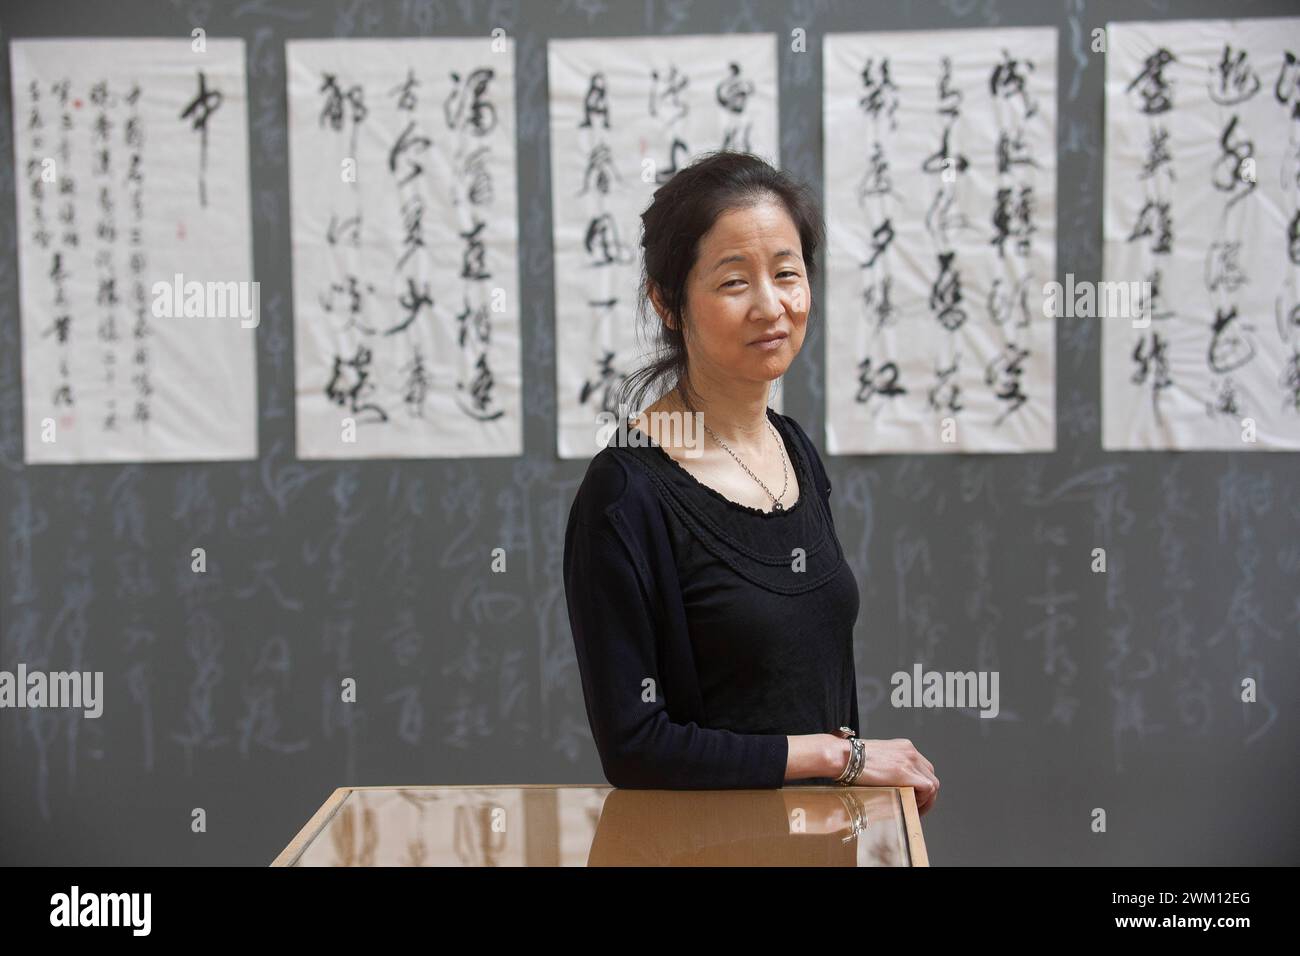 3826375 Julie Otsuka; (add.info.: Festival of Literatures', Rome 2012. Japanese-American writer Julie Otsuka in front of some works by Chinese master calligrapher Xiao Yunru shown at 'Casa delle Letterature' / 'Festival Letterature', Roma 2012. La scrittrice Julie Otsuka davanti ad alcune opere del calligrafo cinese Xiao Yunru esposte nella Casa delle Letterature); © Marcello Mencarini. All rights reserved 2024. Stock Photo